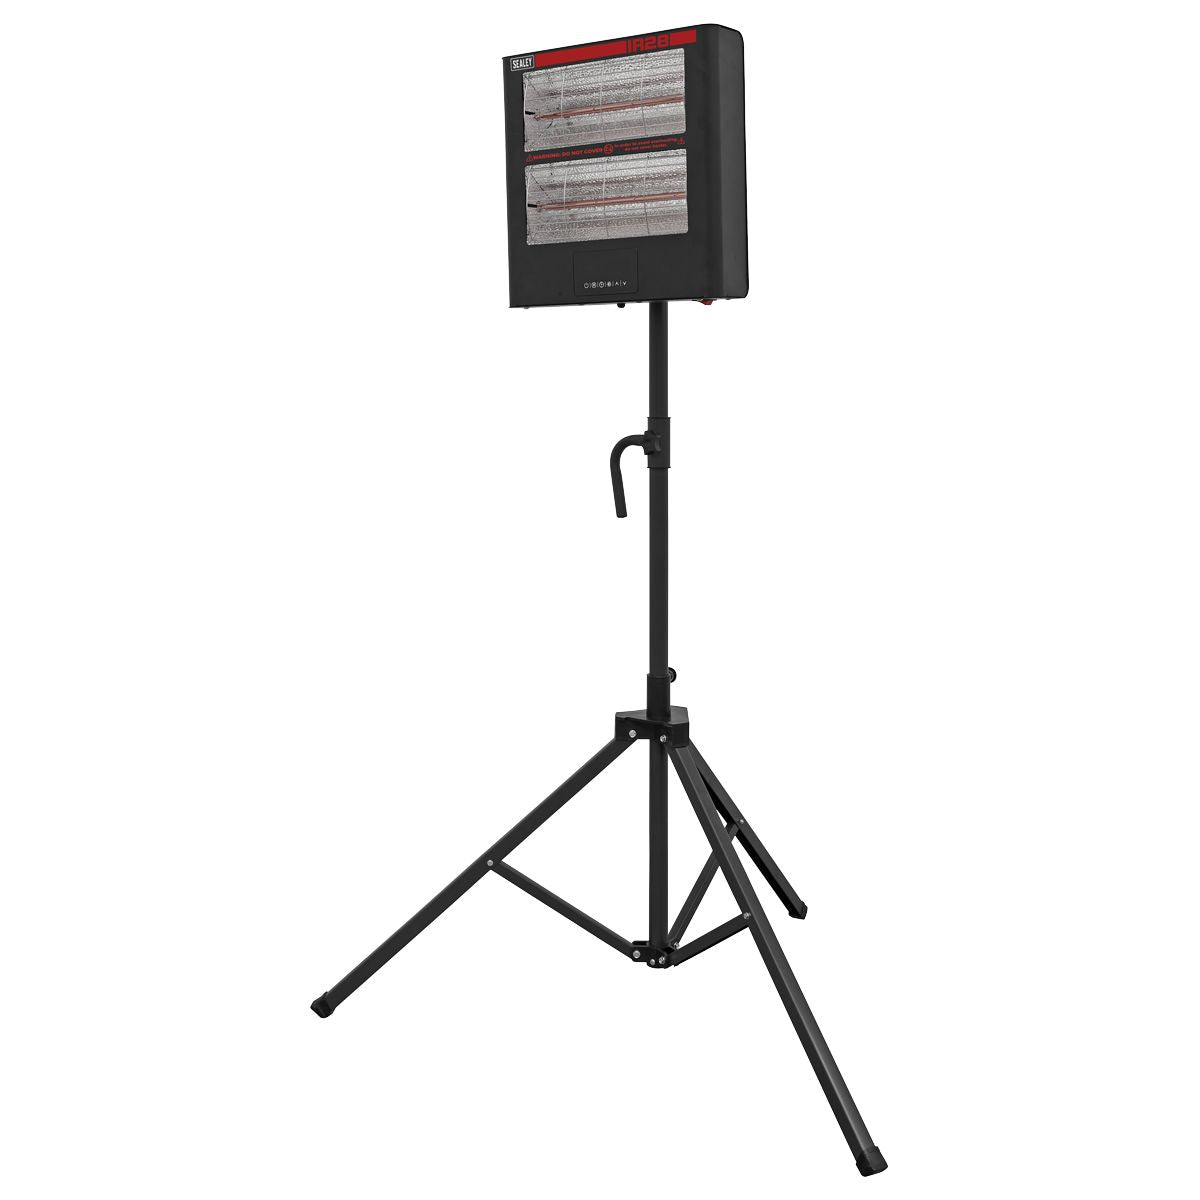 Sealey IR28CT 1.4/2.8kW Infrared Quartz Heater with Tripod Stand 230V